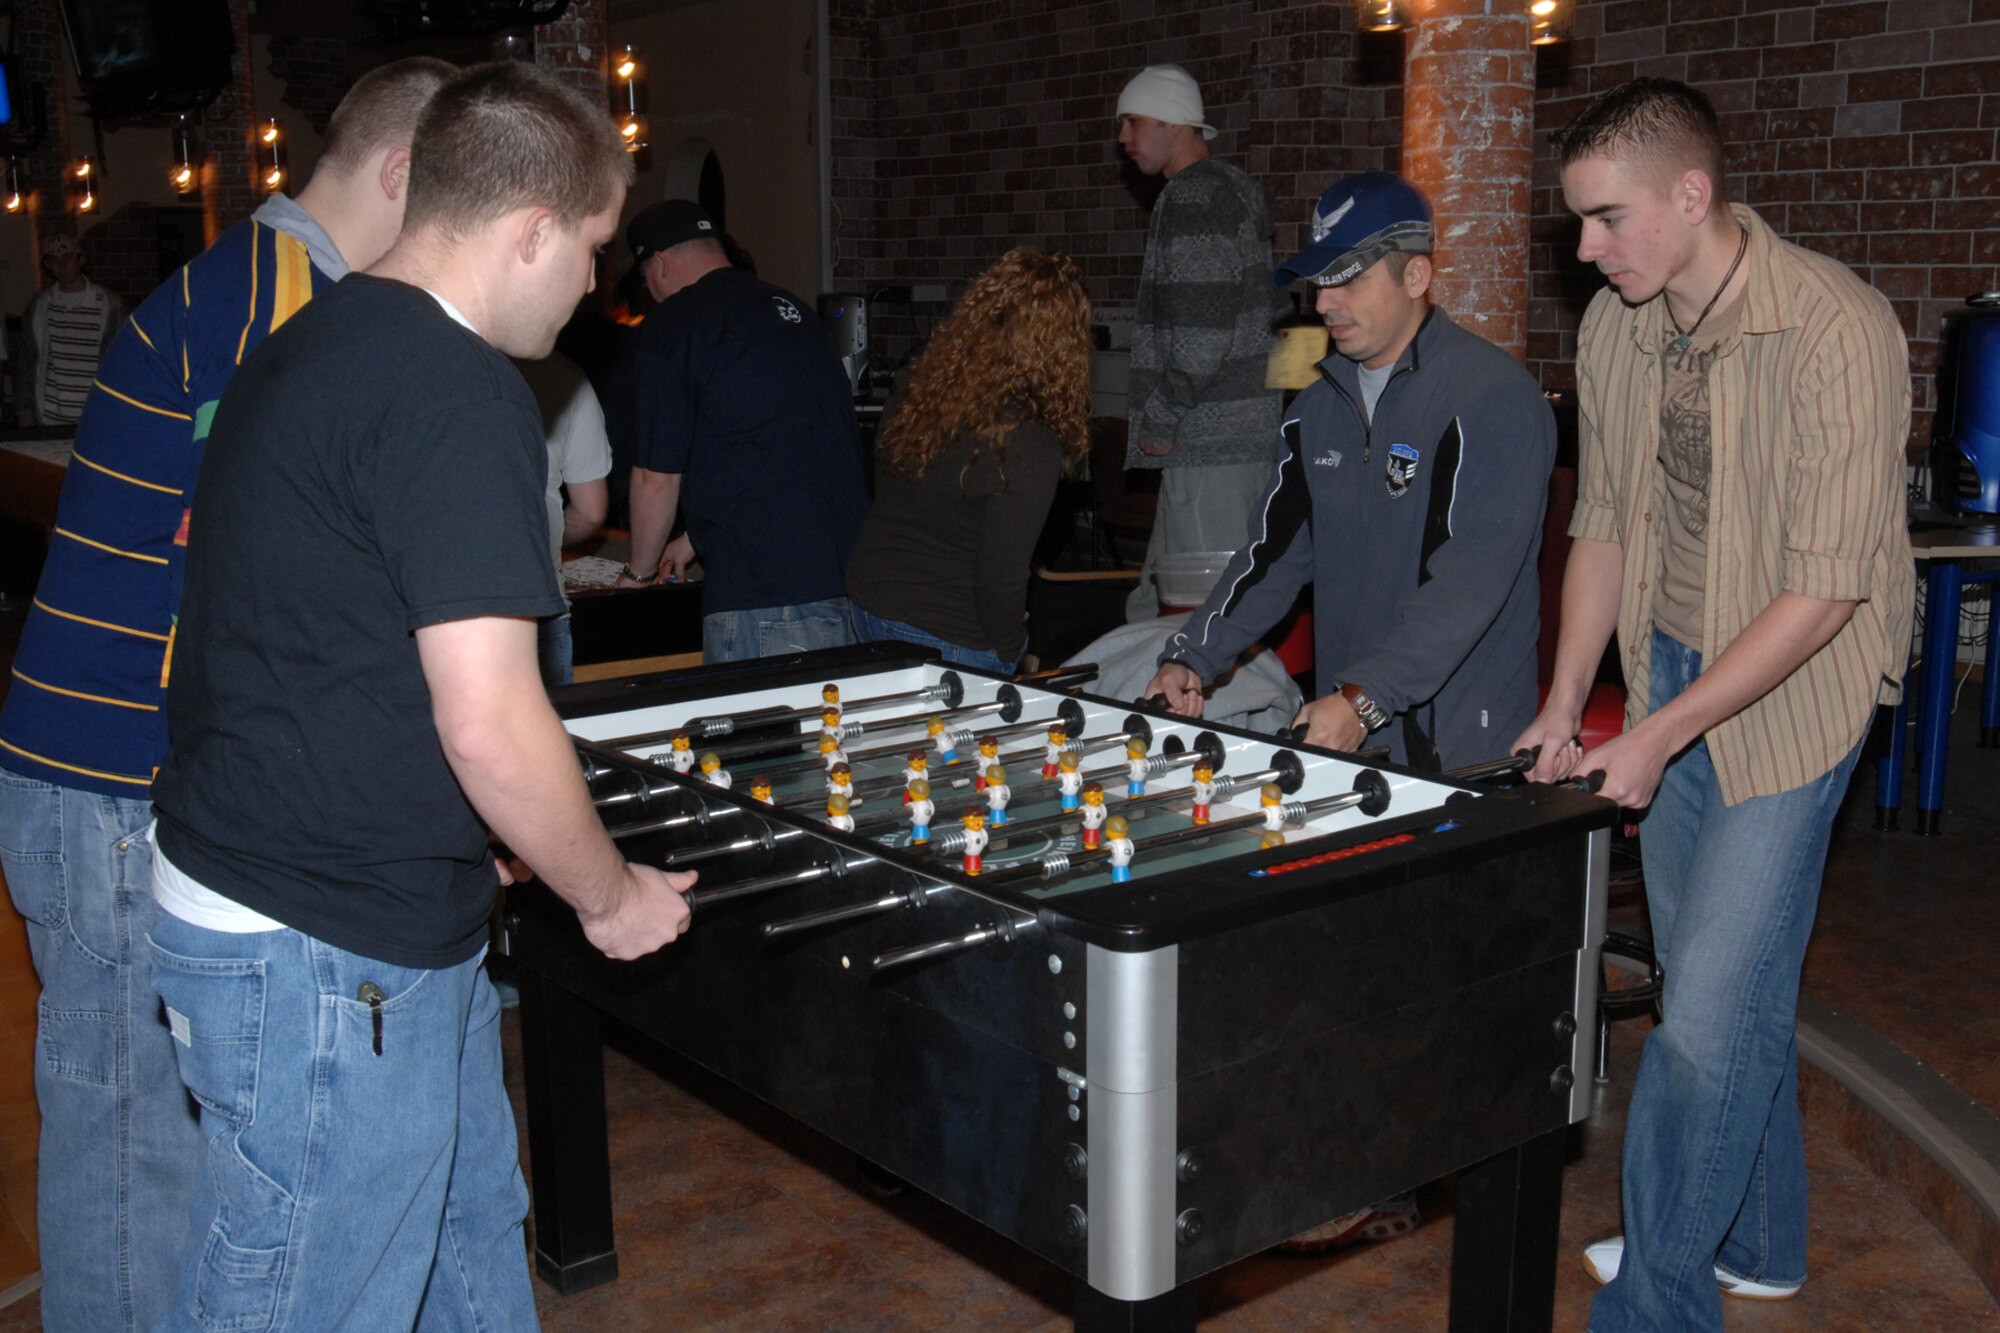 SPANGDAHLEM AIR BASE, Germany – Master Sgt. Michael Garcia, 606th Air Control Squadron first sergeant, plays foosball with various Airmen at the Unaccompanied Airman’s Holiday Party in the Brick House Dec. 22, 2007. The party was sponsored by the 52nd Fighter Wing First Sergeant’s Council. (U.S. Air Force photo/Airman 1st Class Jenifer Calhoun)